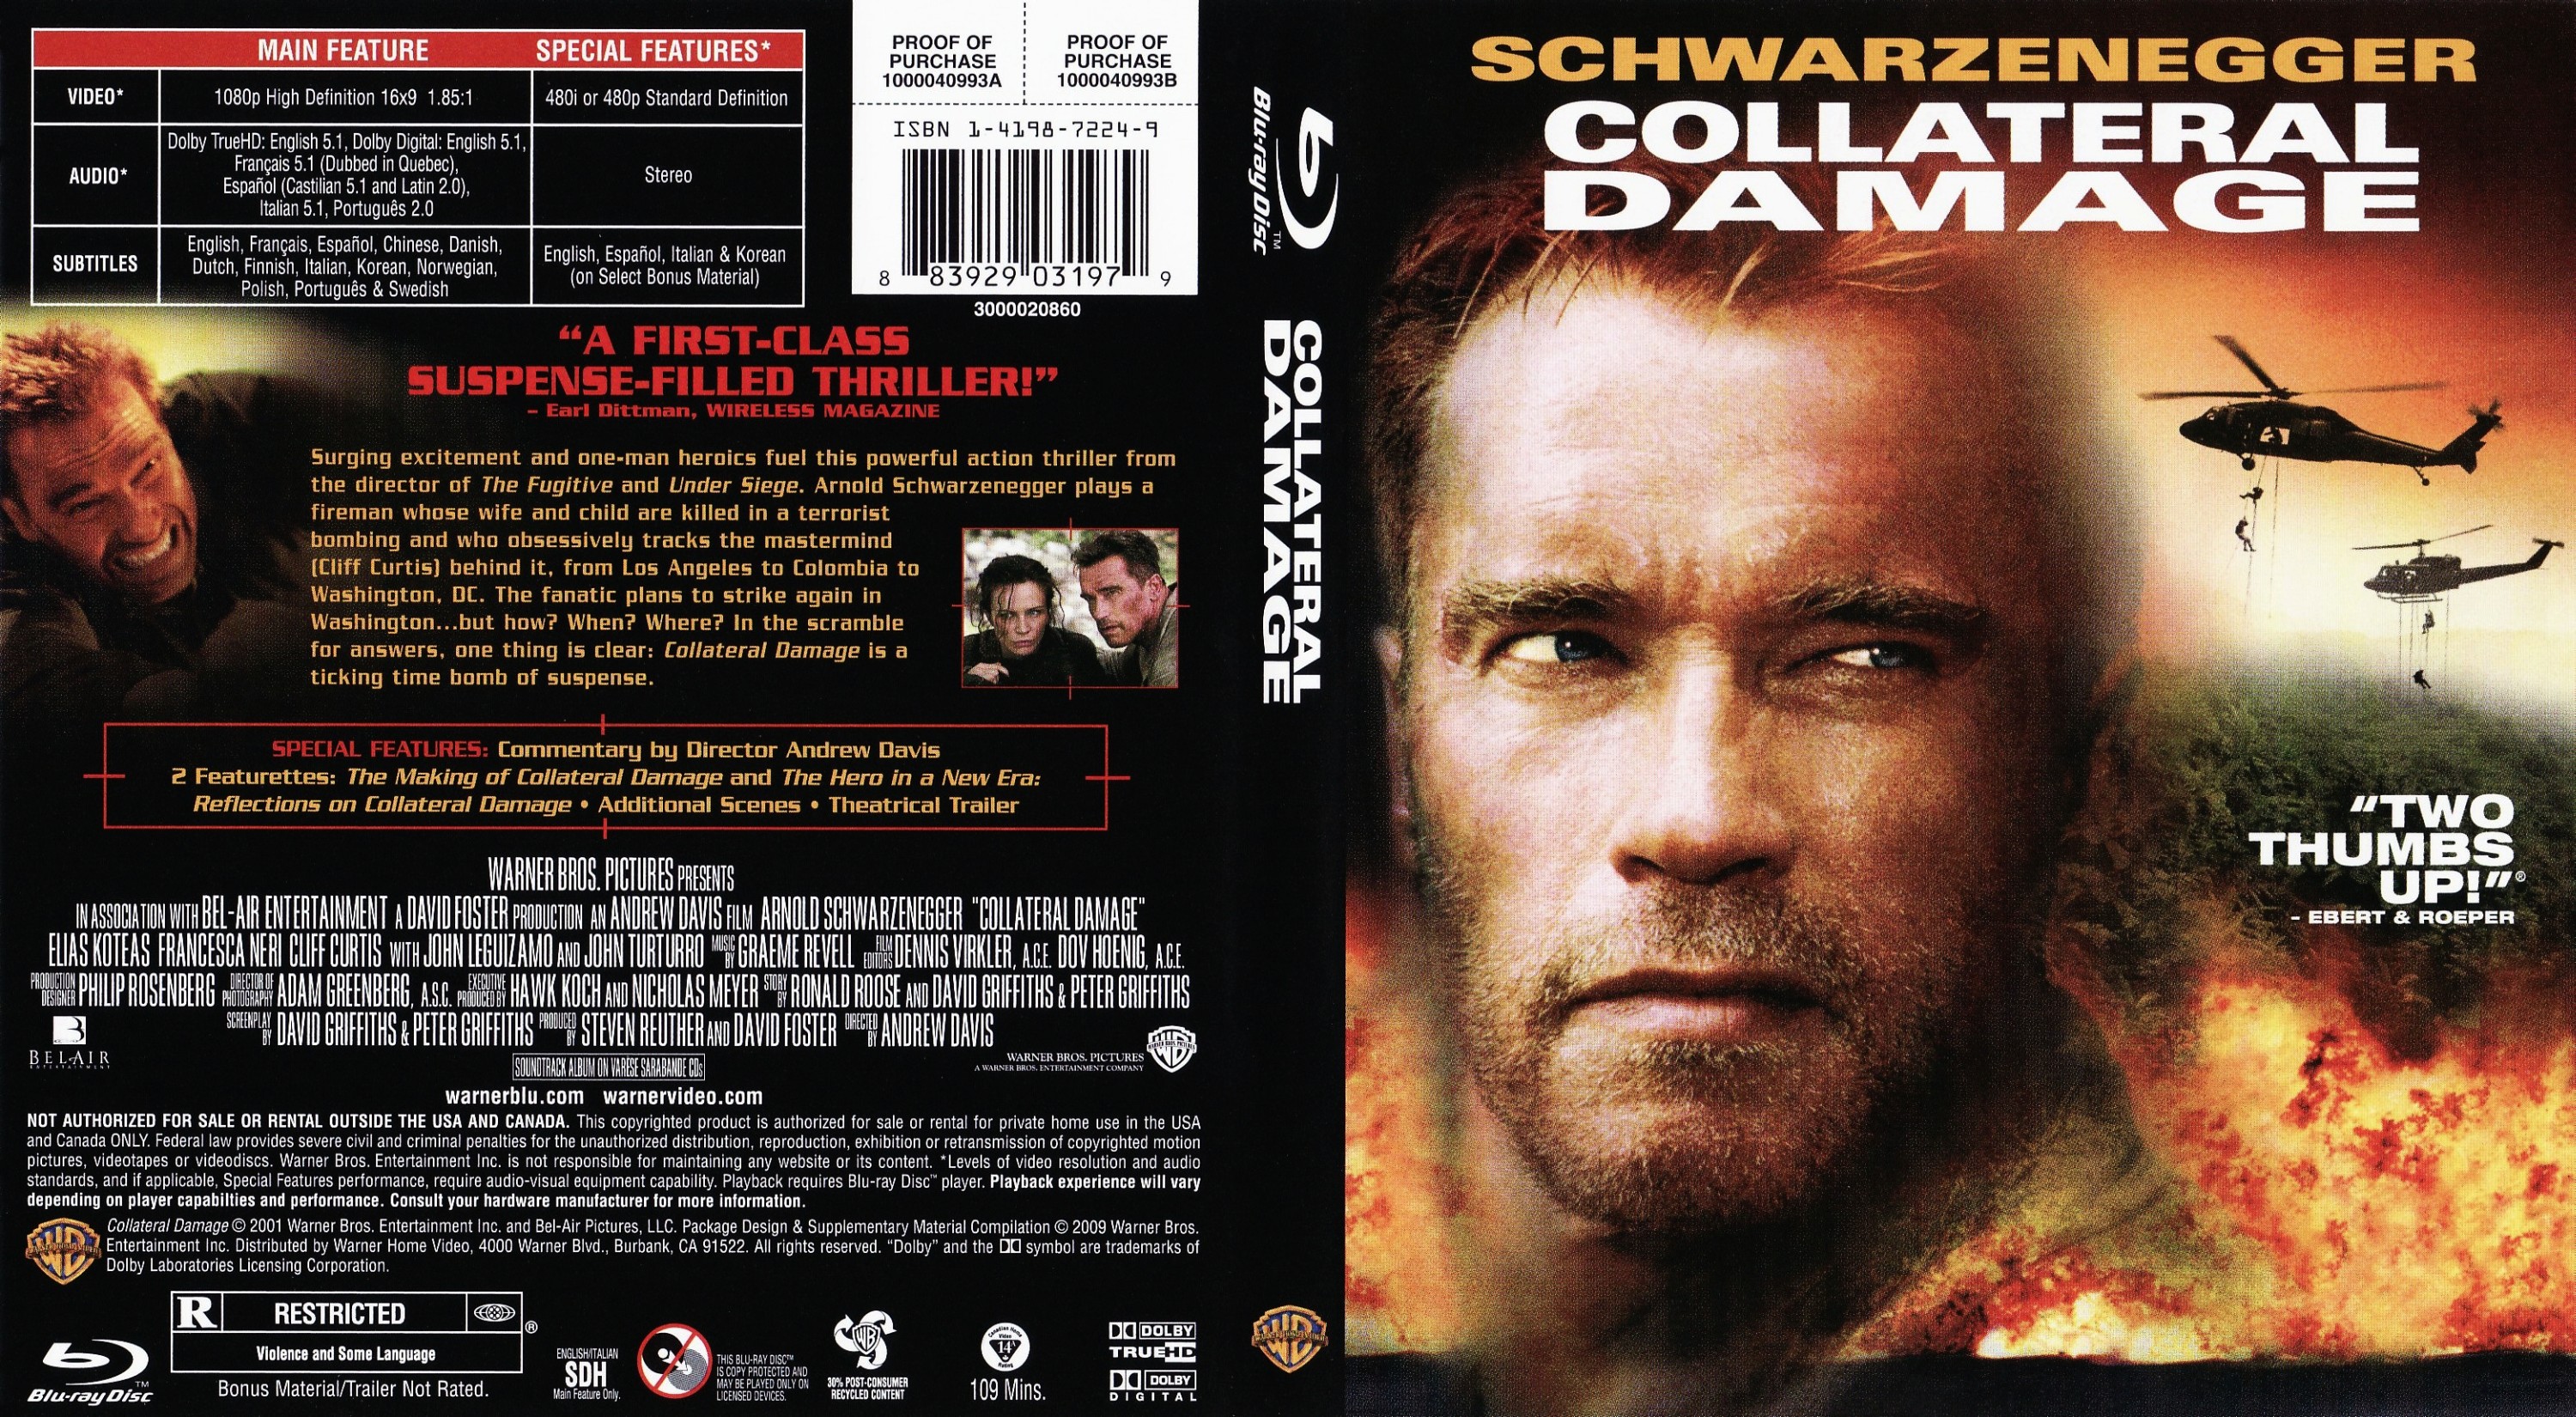 Jaquette DVD Collateral damage Zone 1 (BLU-RAY)